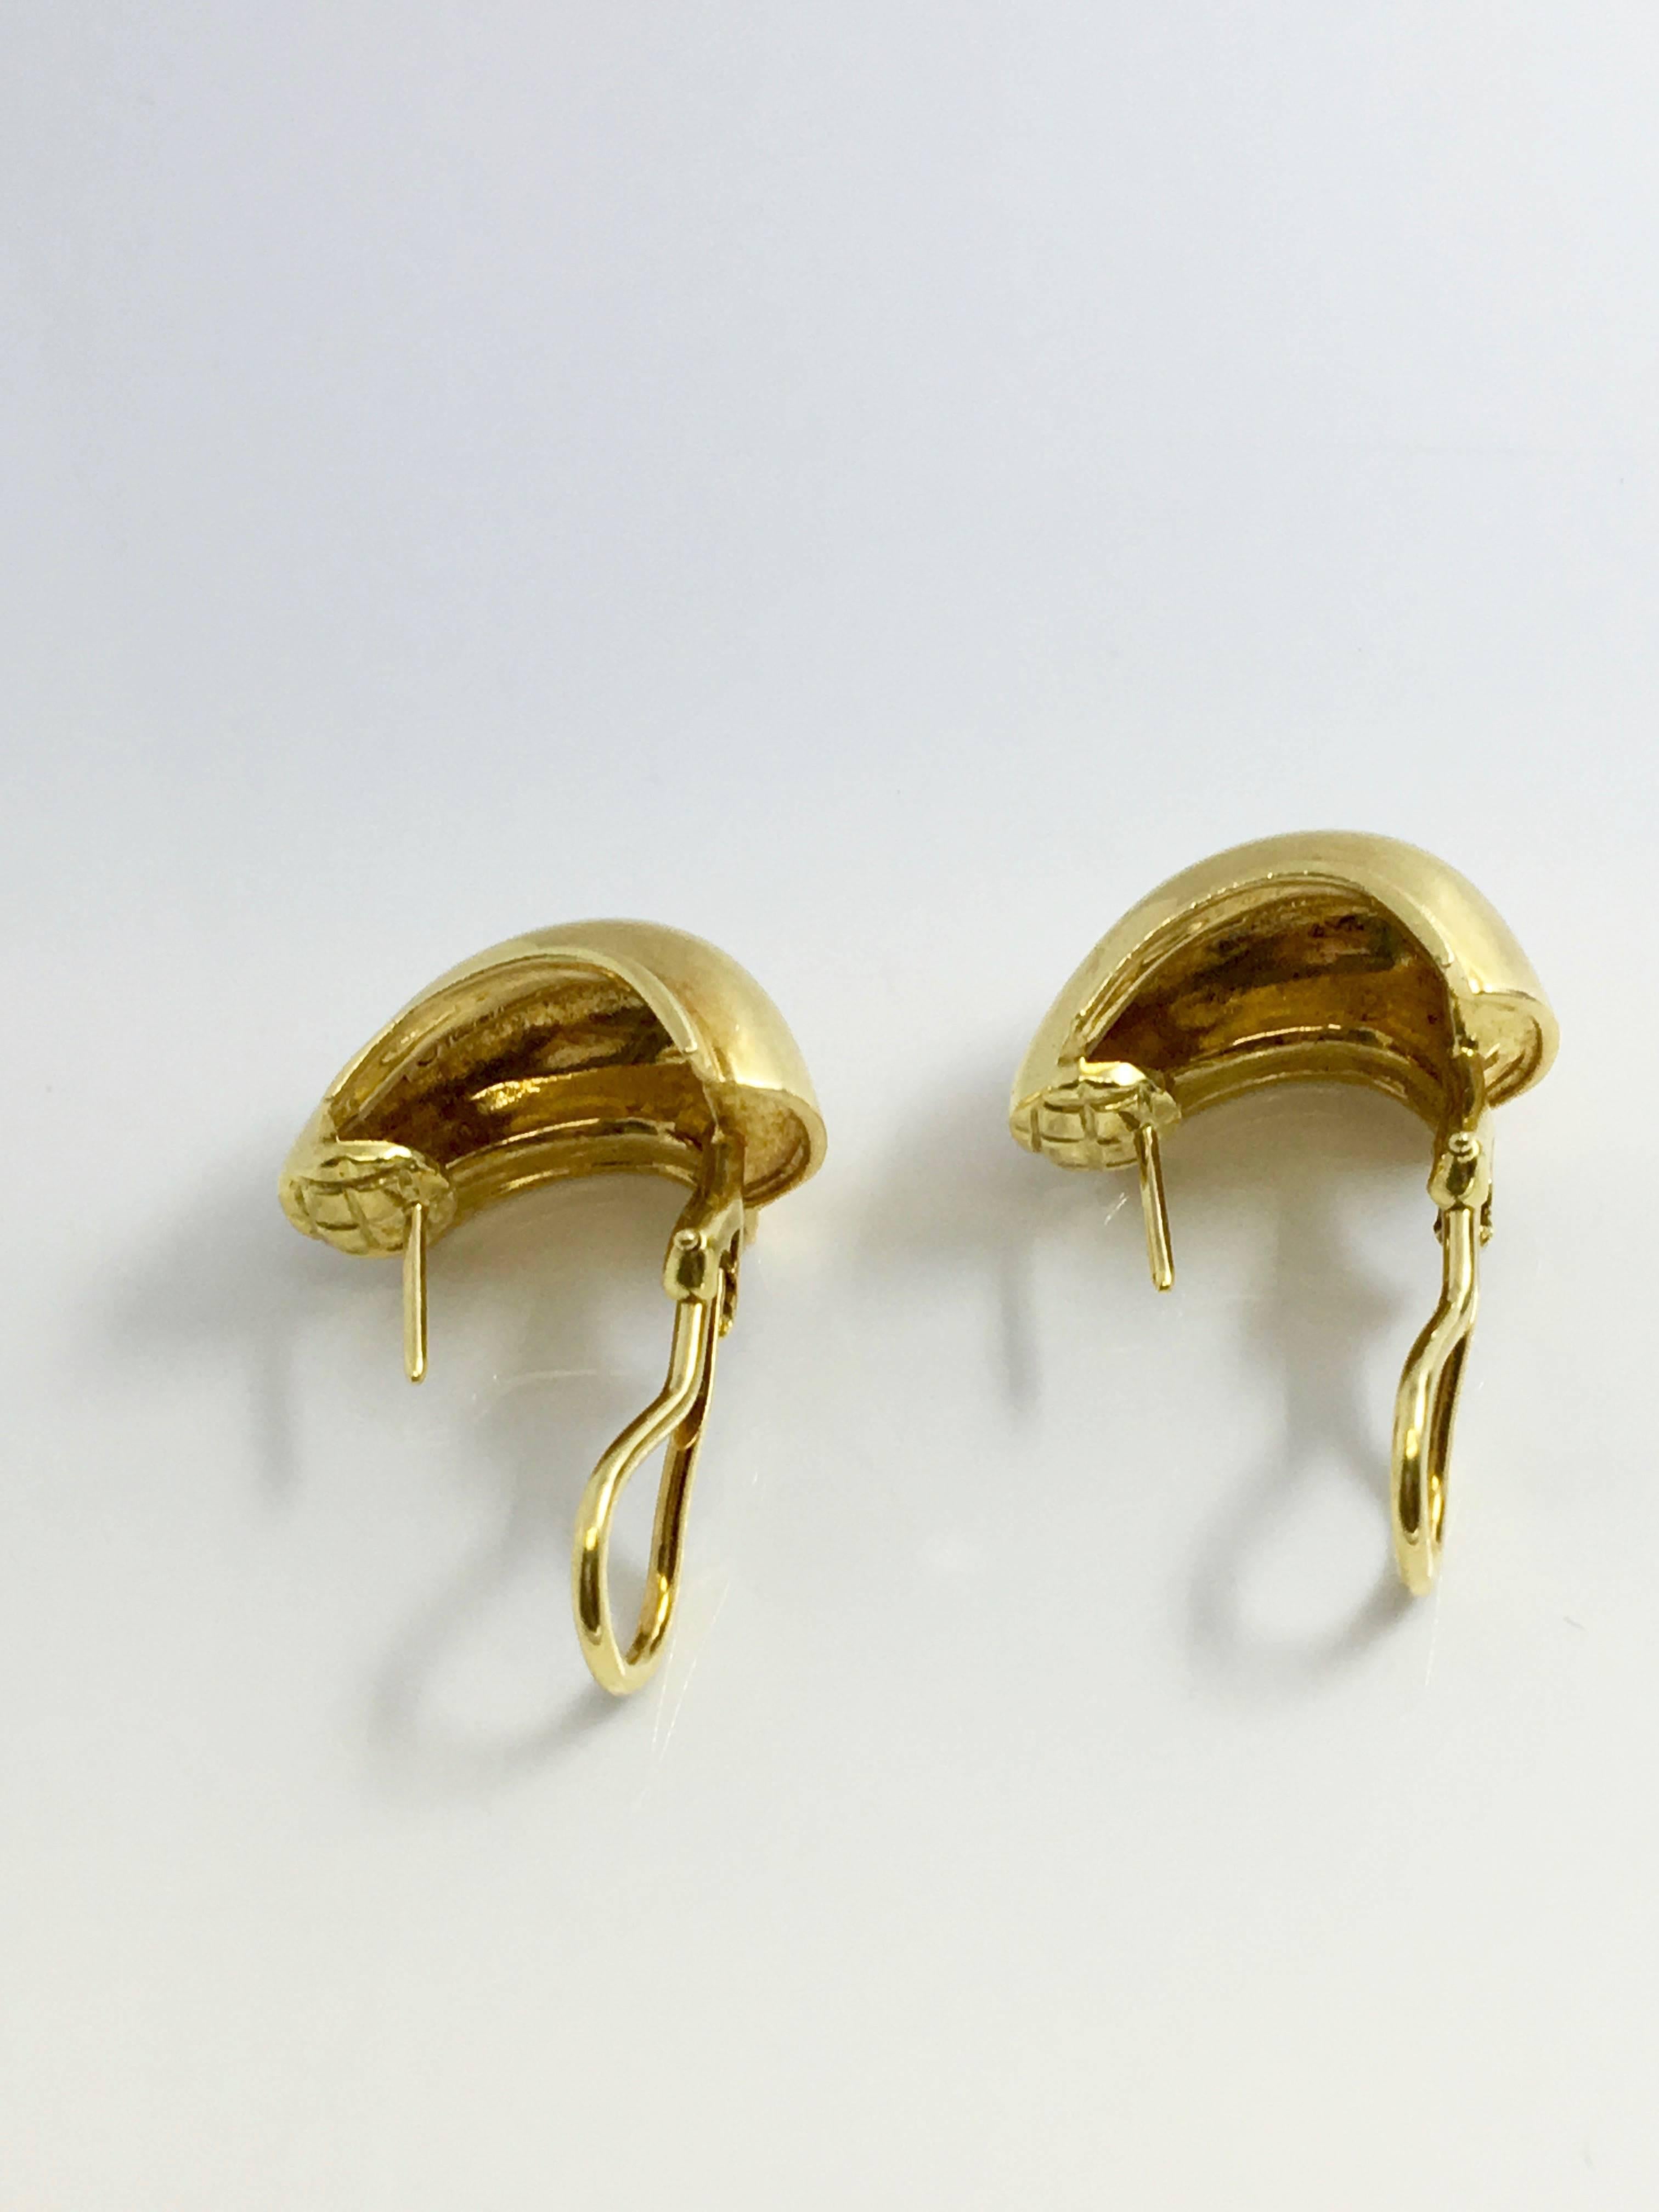 
Metal: 18k Yellow Gold
Measurements: 21mm x 13mm
Weight: 13 grams

These earrings are for pierced ears 
Hallmarks: T & Co  Paloma Picasso 750

These earrings are for pierced ears.
